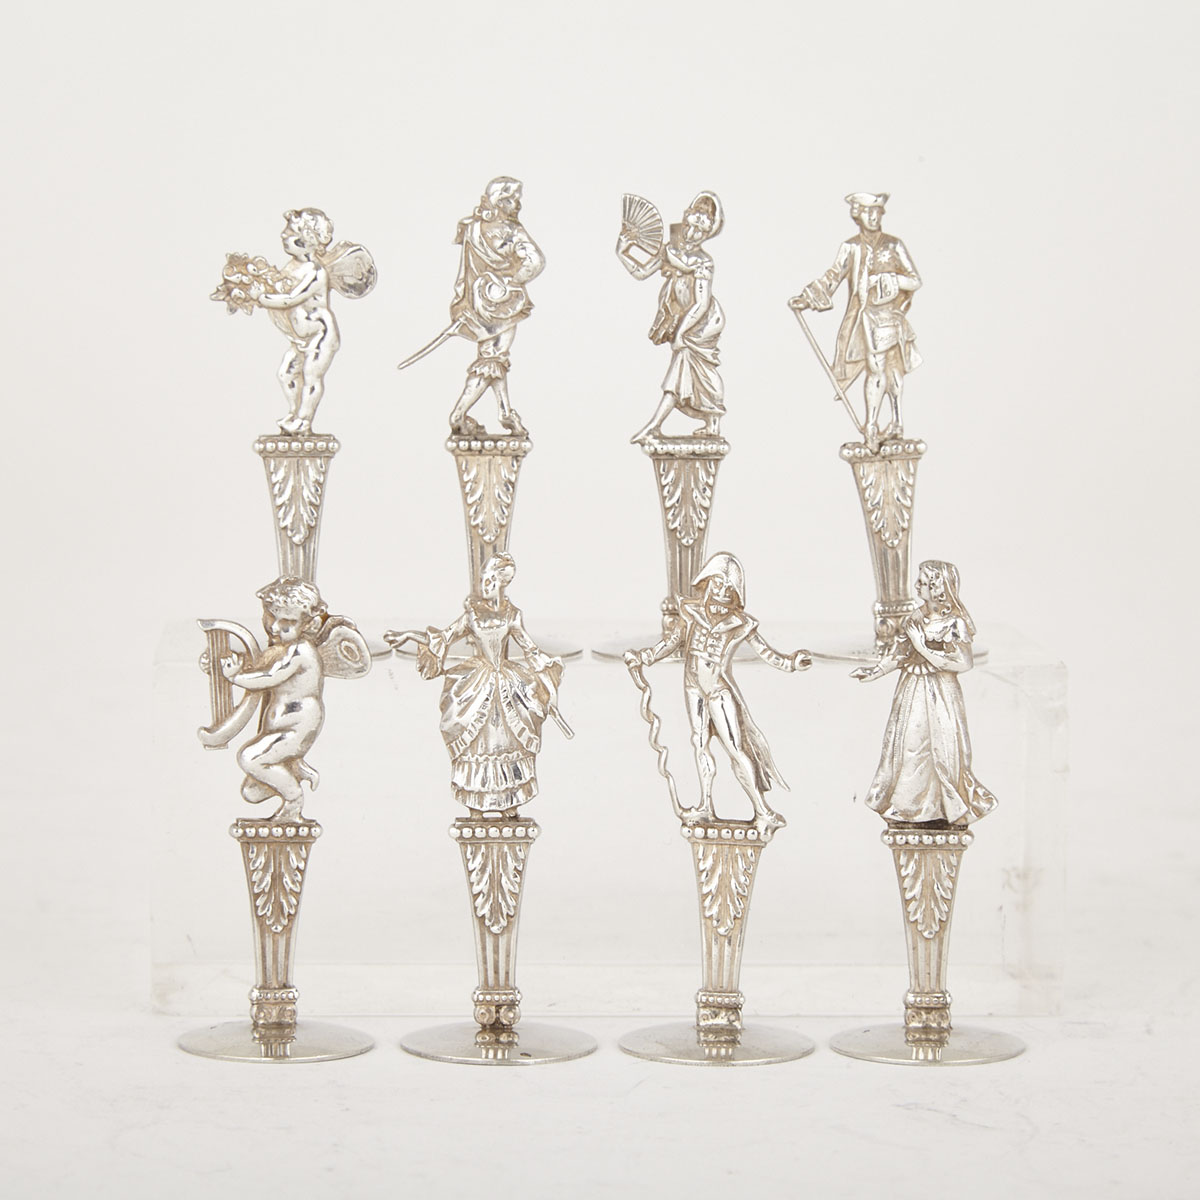 Eight French Silver Figural Place Card Holders, Ernest Eschwége, Paris, early 20th century